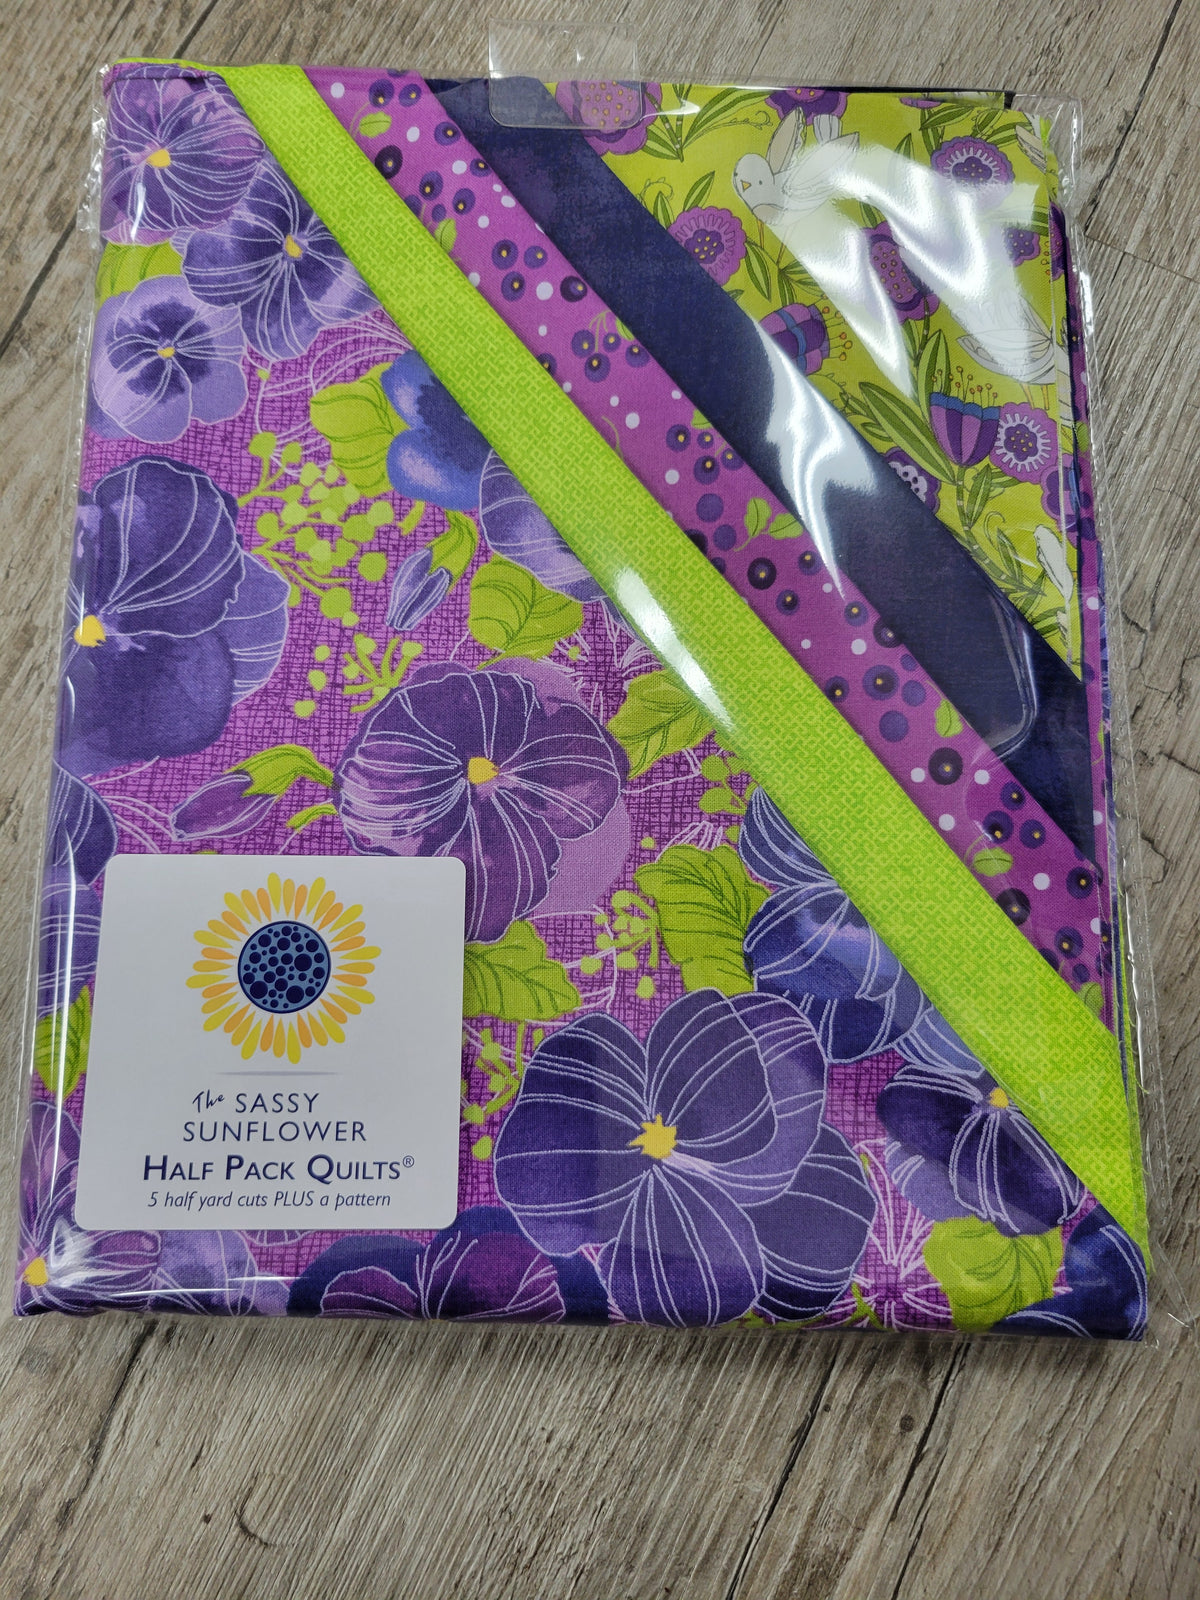 Pansy's Posies - The Sassy Sunflower Half Pack Quilts™ Kit